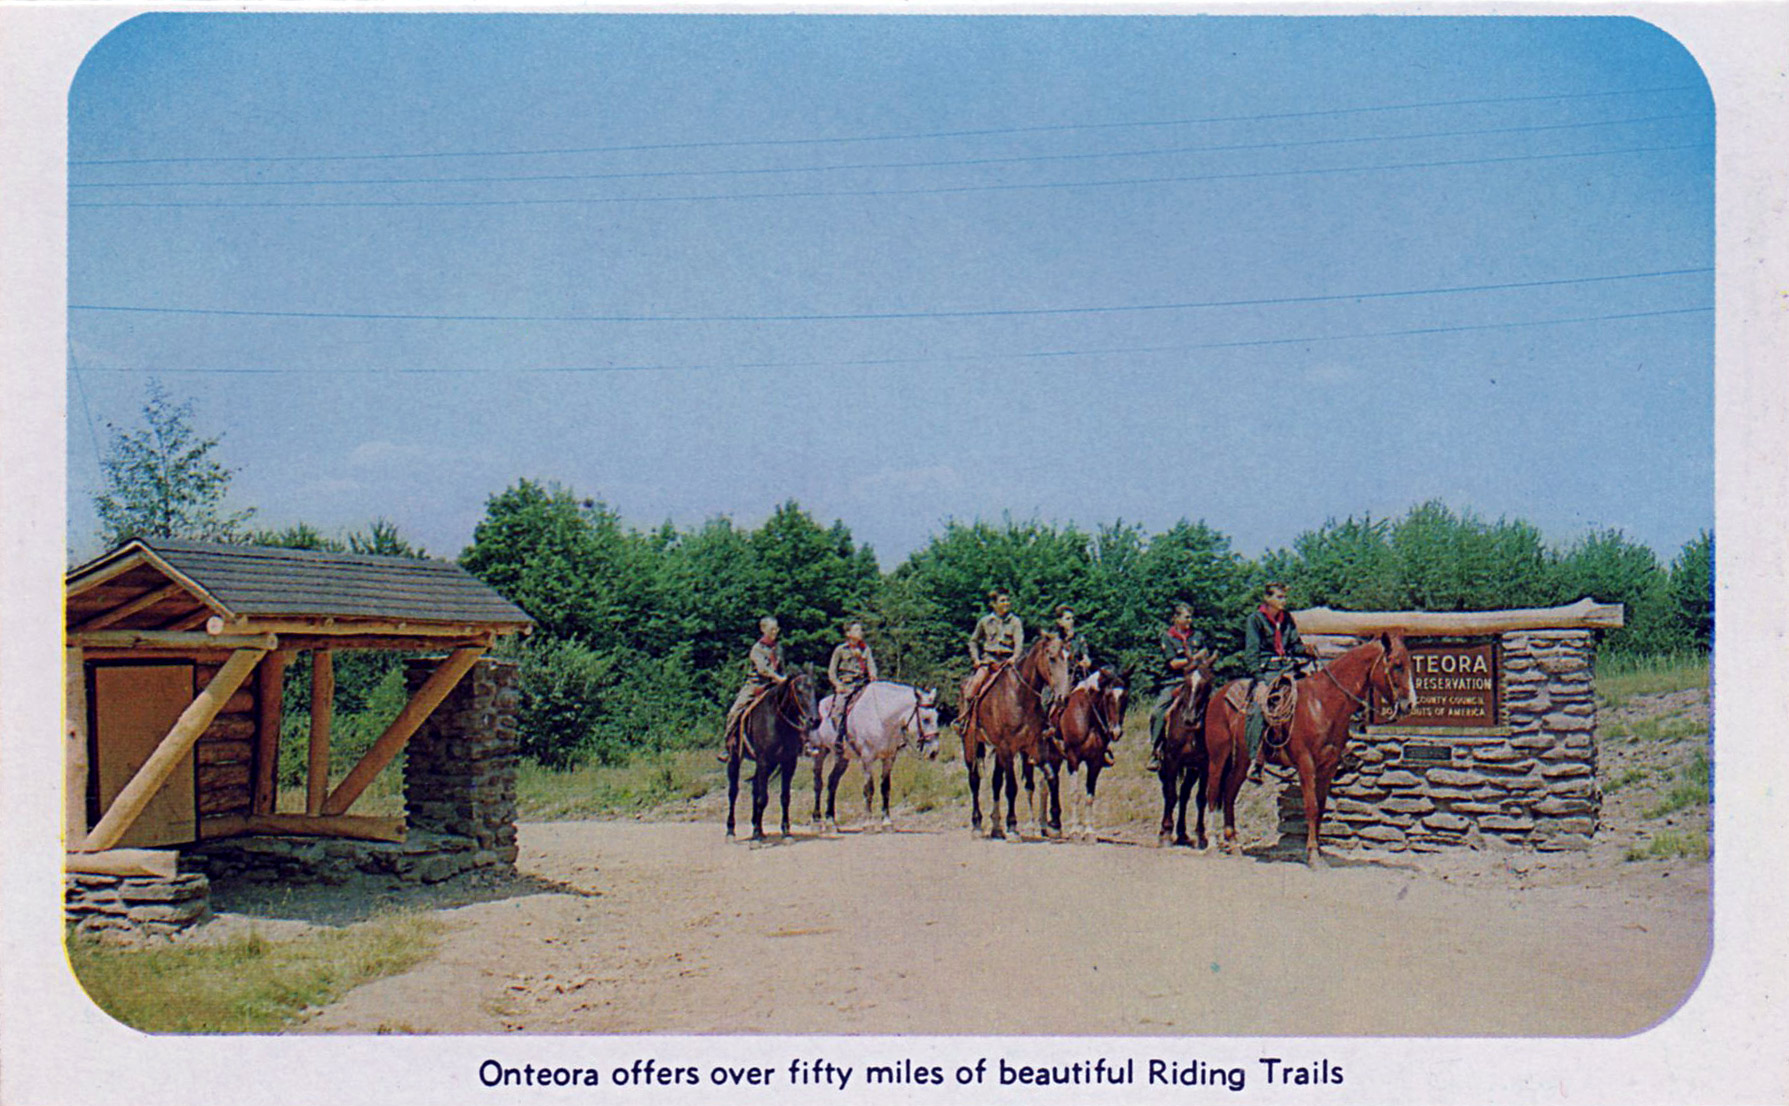 Onteora offers over fifty miles of beautiful Riding Trails